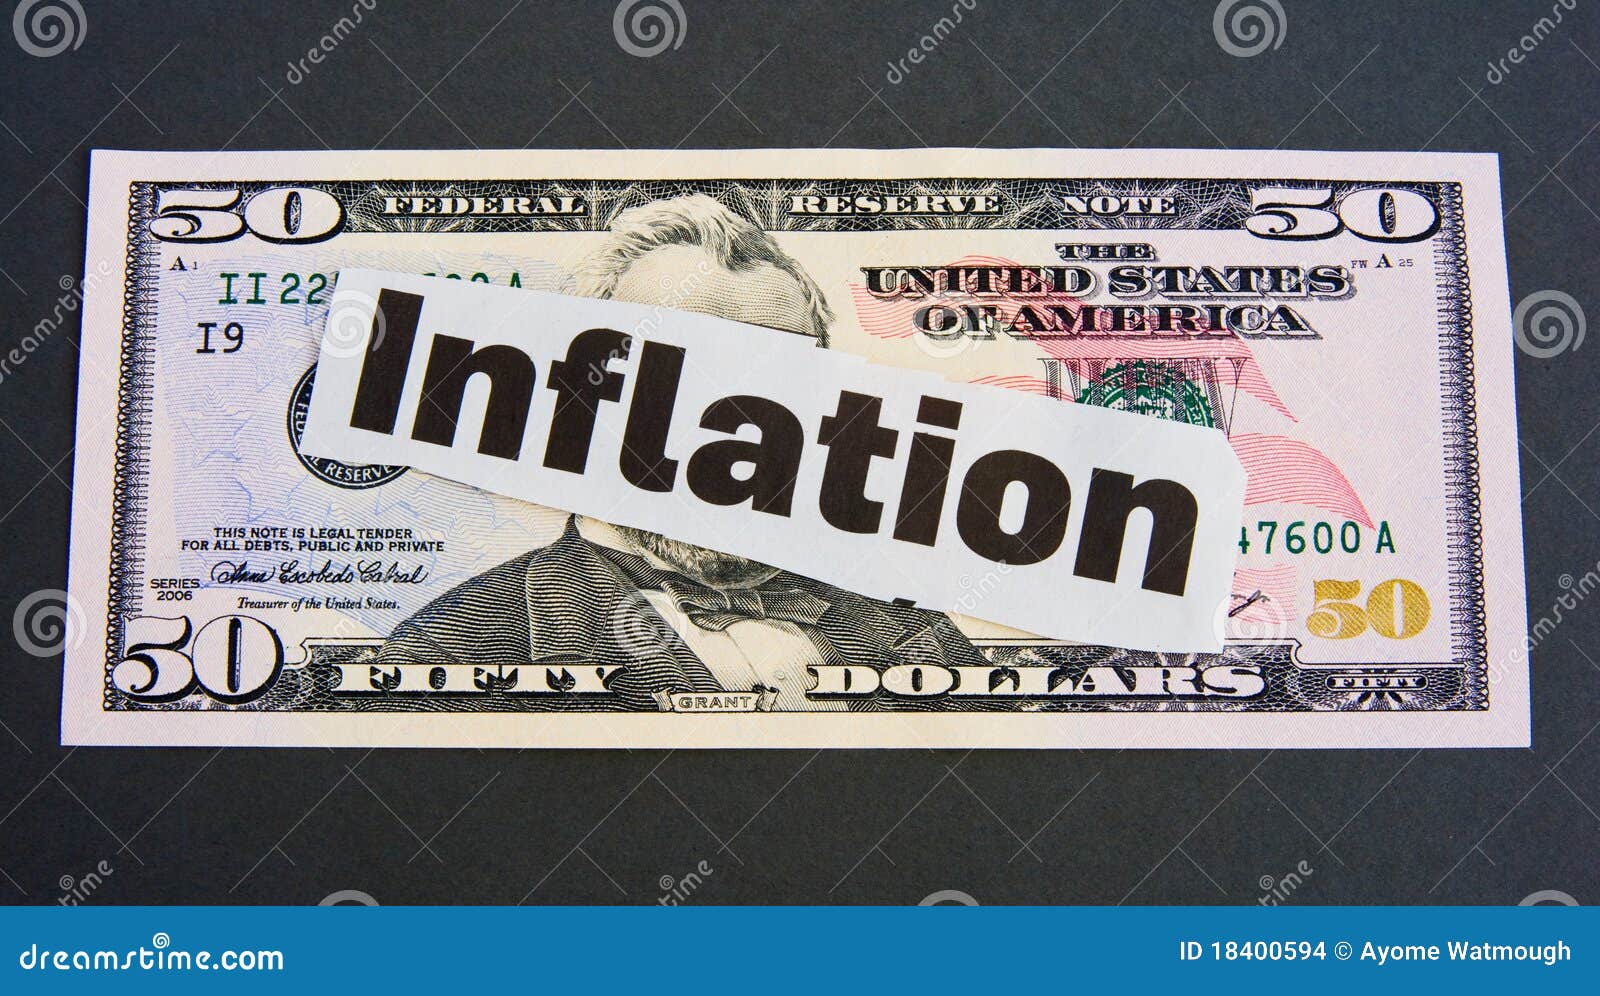 inflation: currency depreciation ?